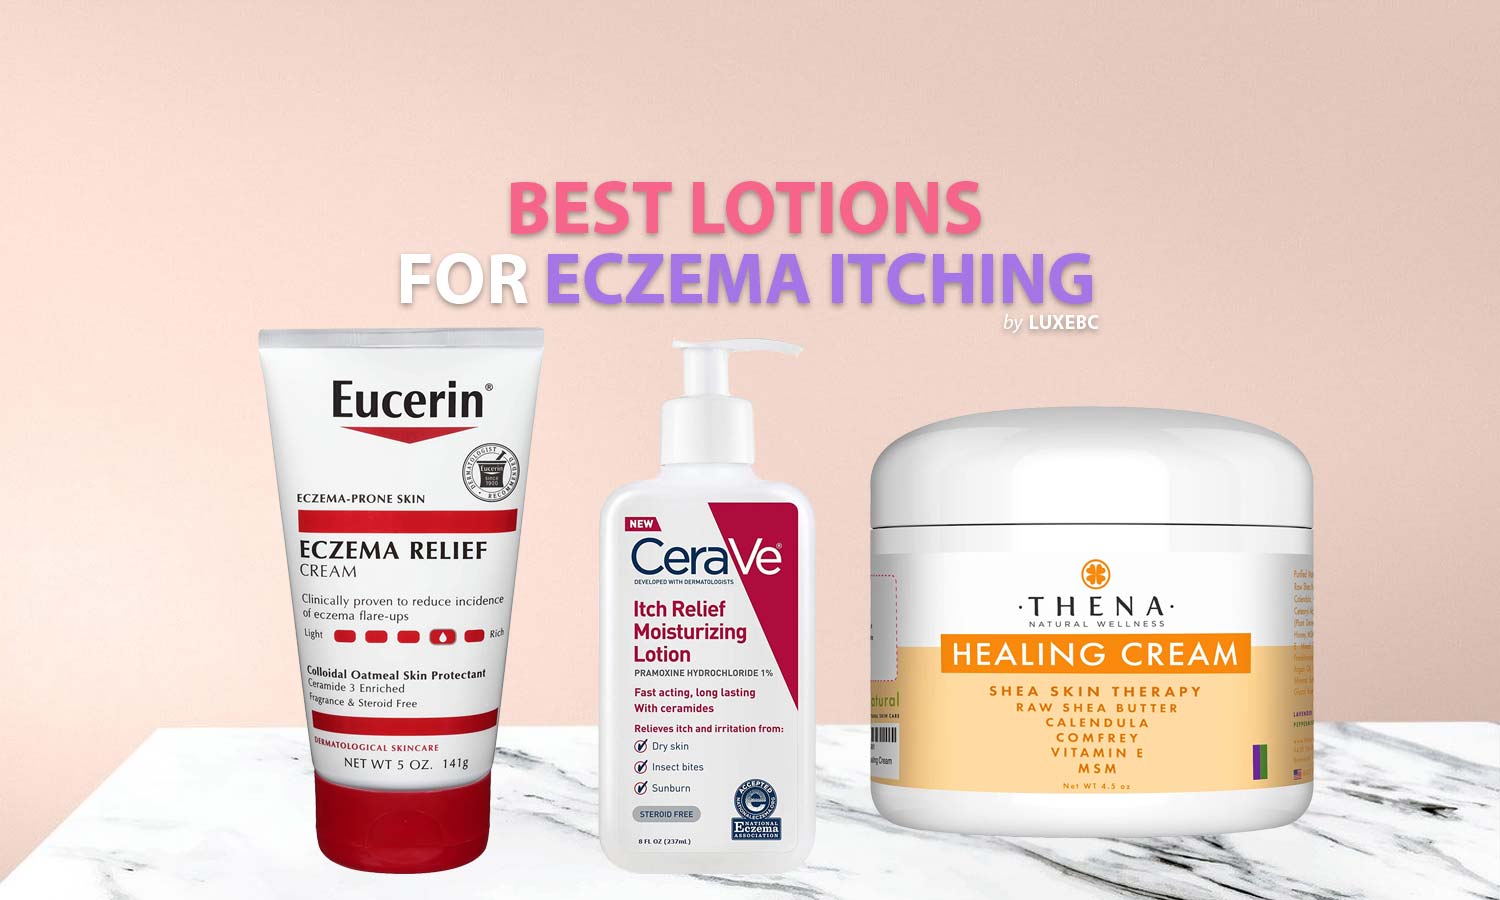 The 10 Best Lotions for Eczema Itching of 2020